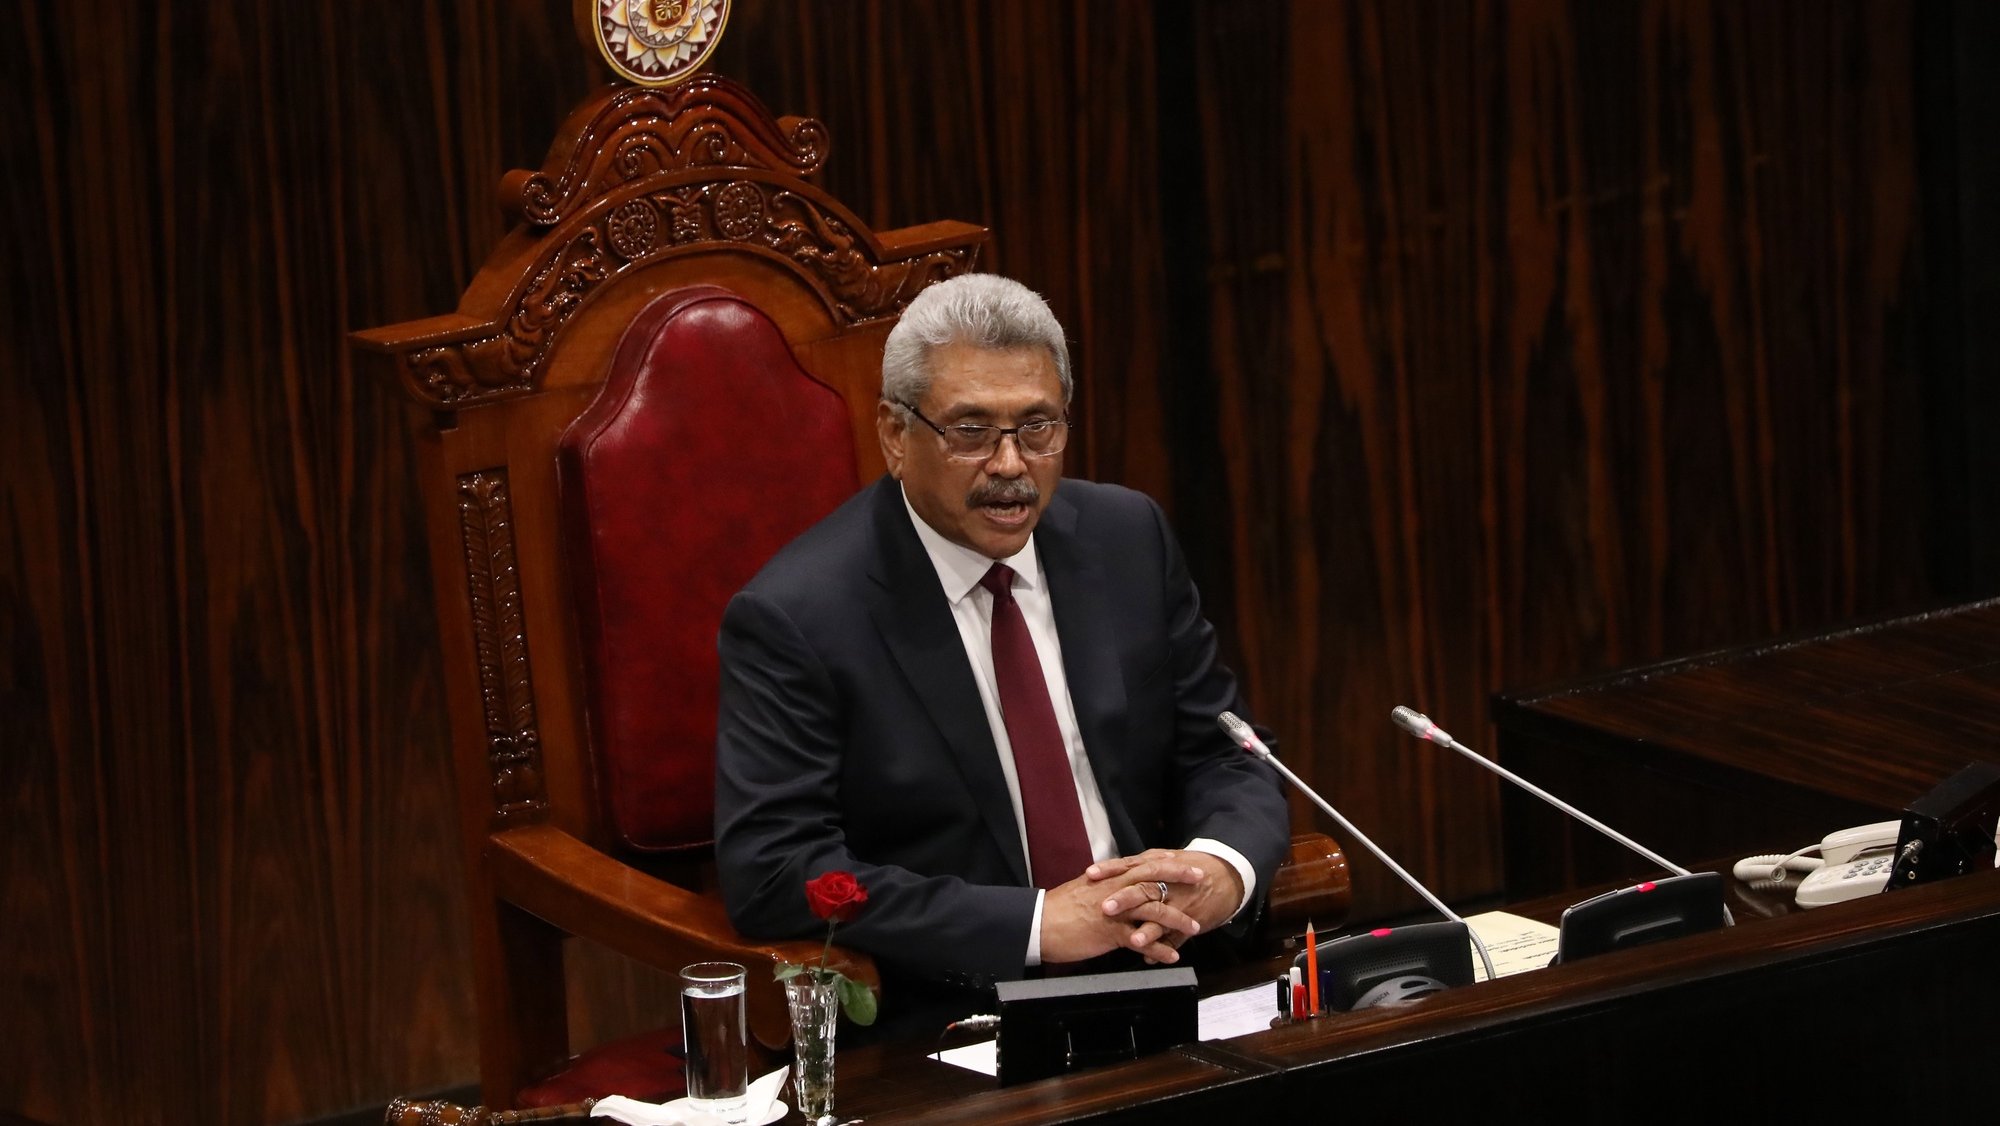 epa10062147 (FILE) - Sri Lankan President Gotabaya Rajapaksa addresses the parliament during ceremonial inauguration of the first session of the 9th parliament in Colombo, Sri Lanka, 20 August 2020 (reissued 09 July 2022). Sri Lankan President Rajapaksa on 09 July 2022 has agreed to resign on 13 July, the parliament&#039;s speaker said in a statement after a party leaders&#039; meeting. Thousands of protesters broke through police barricades and stormed the president&#039;s official residence during anti-government protest in Colombo. Violent protests have been rocking the country for months over the government&#039;s alleged failure to address the worst economic crisis in decades.  EPA/CHAMILA KARUNARATHNE *** Local Caption *** 56285692